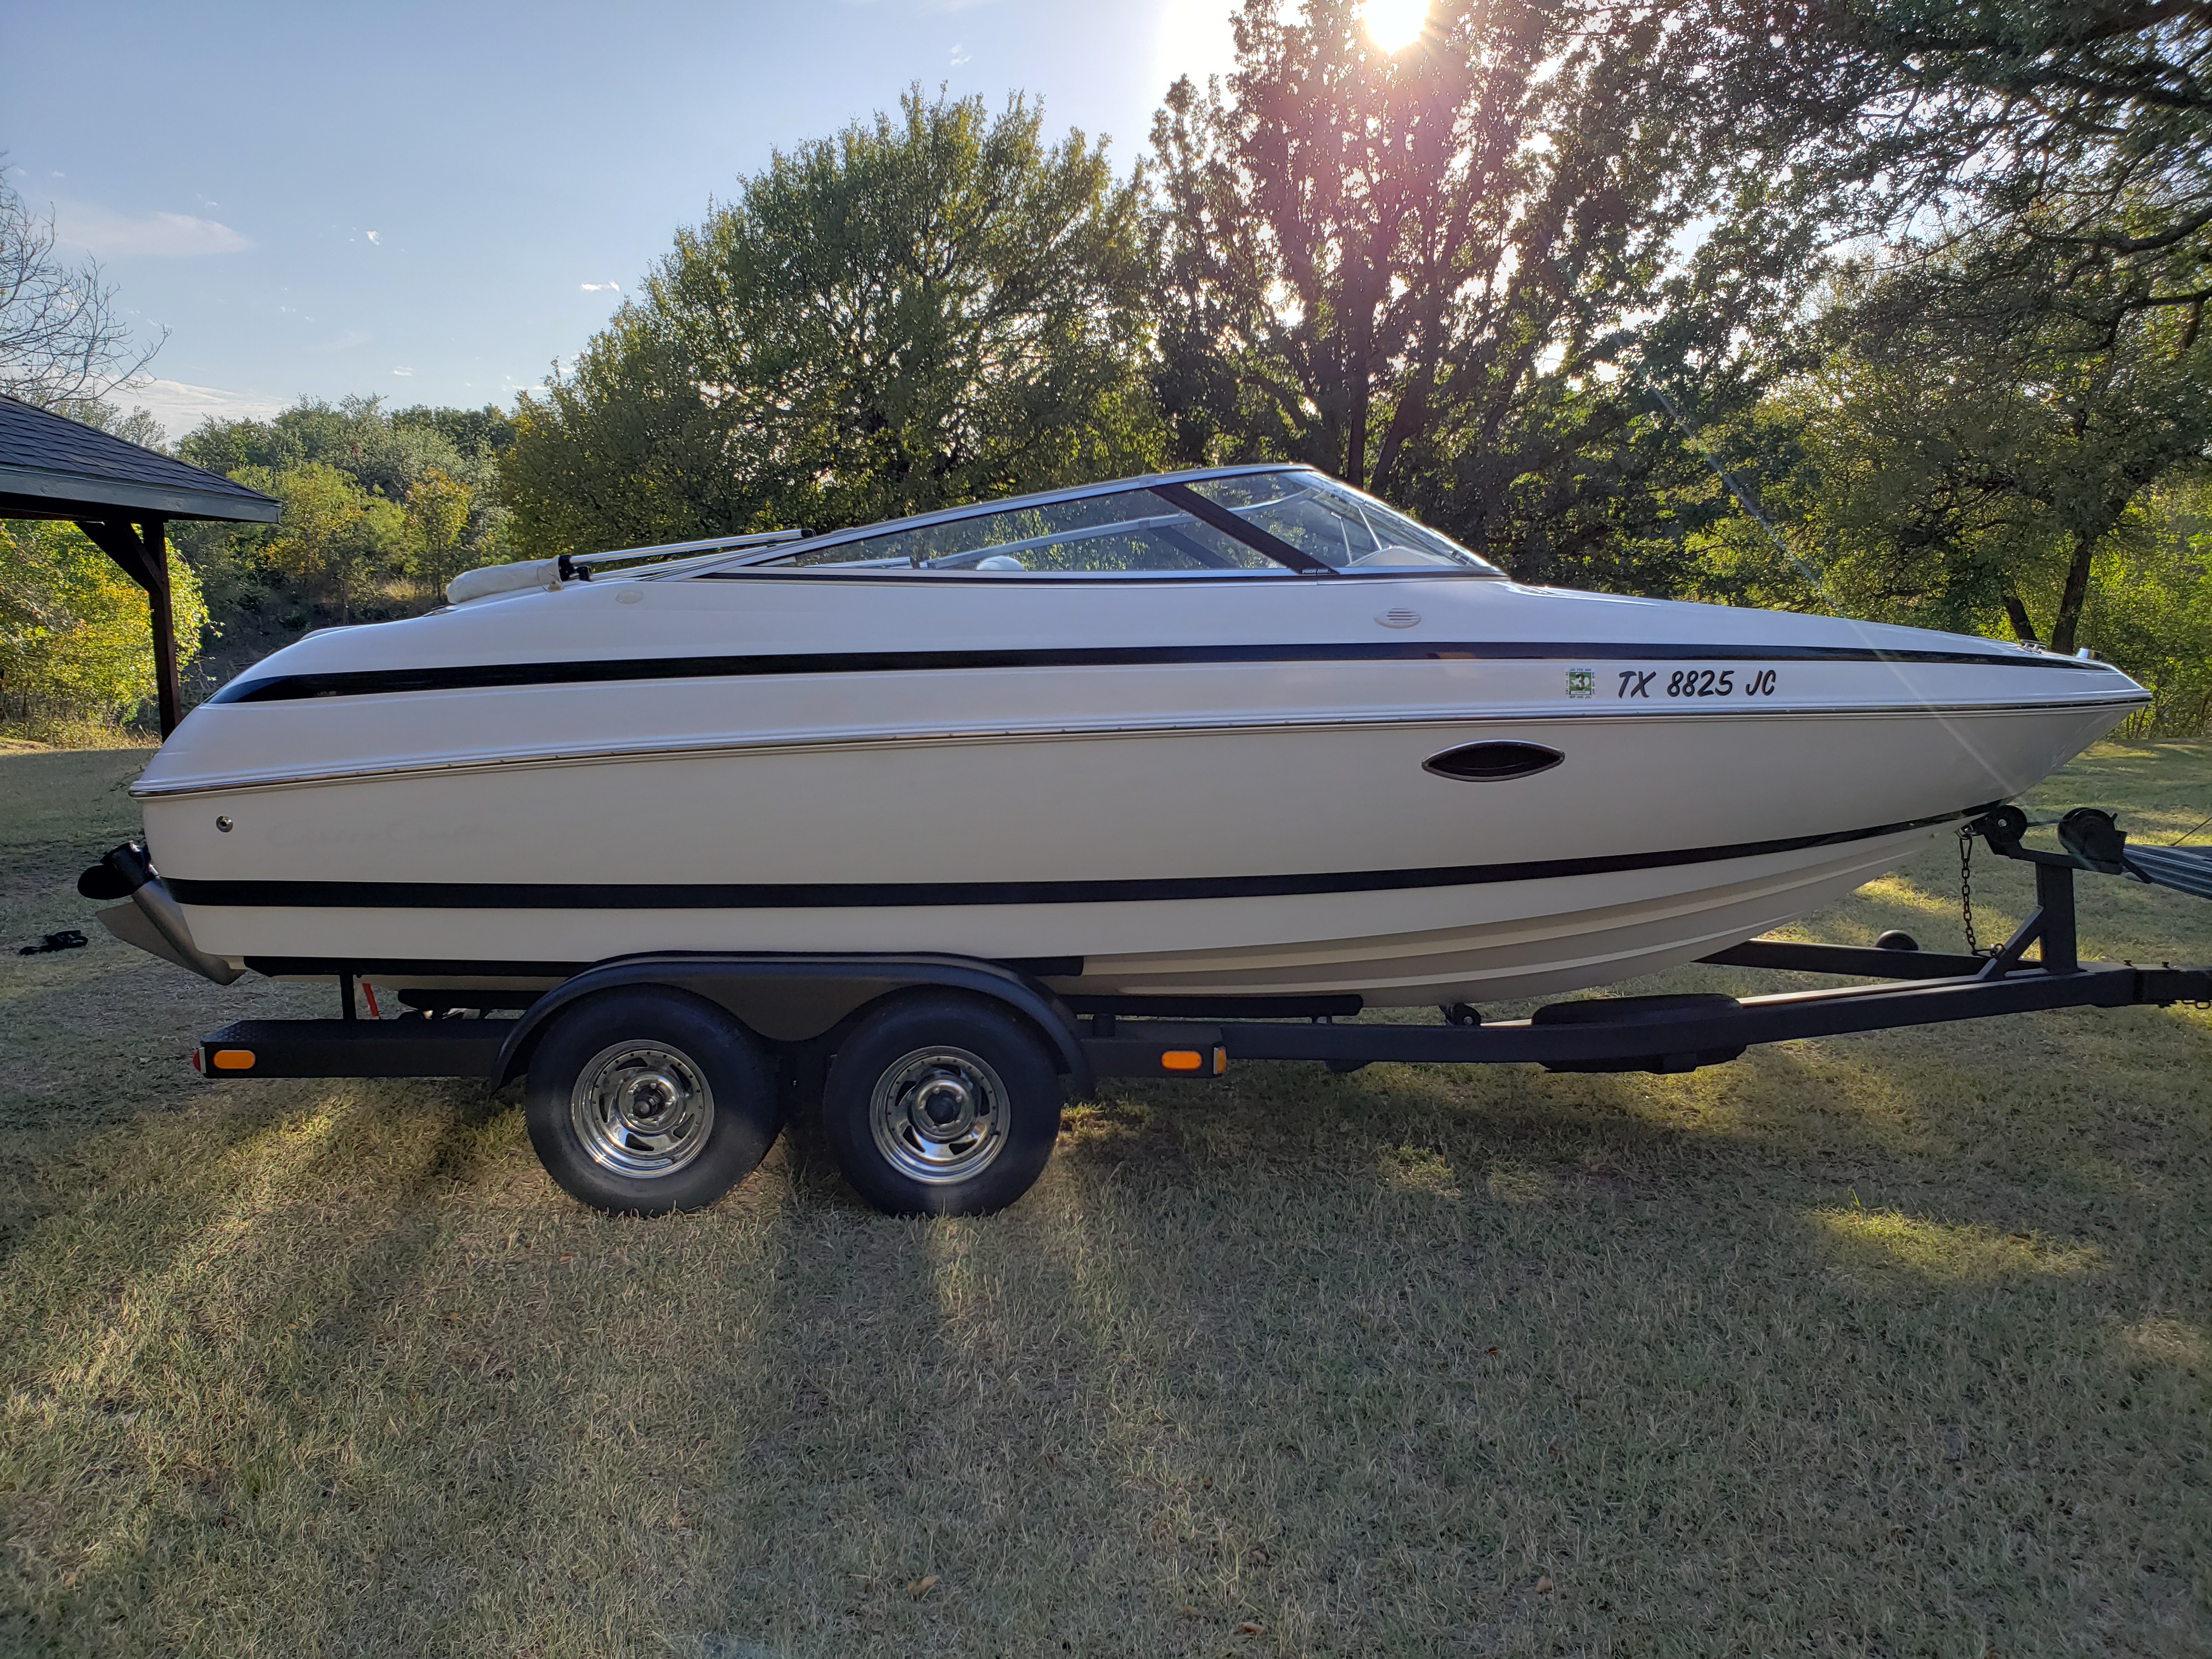 1999 Chris Craft 210 Bowrider Power boat for sale in Azle, TX - image 1 